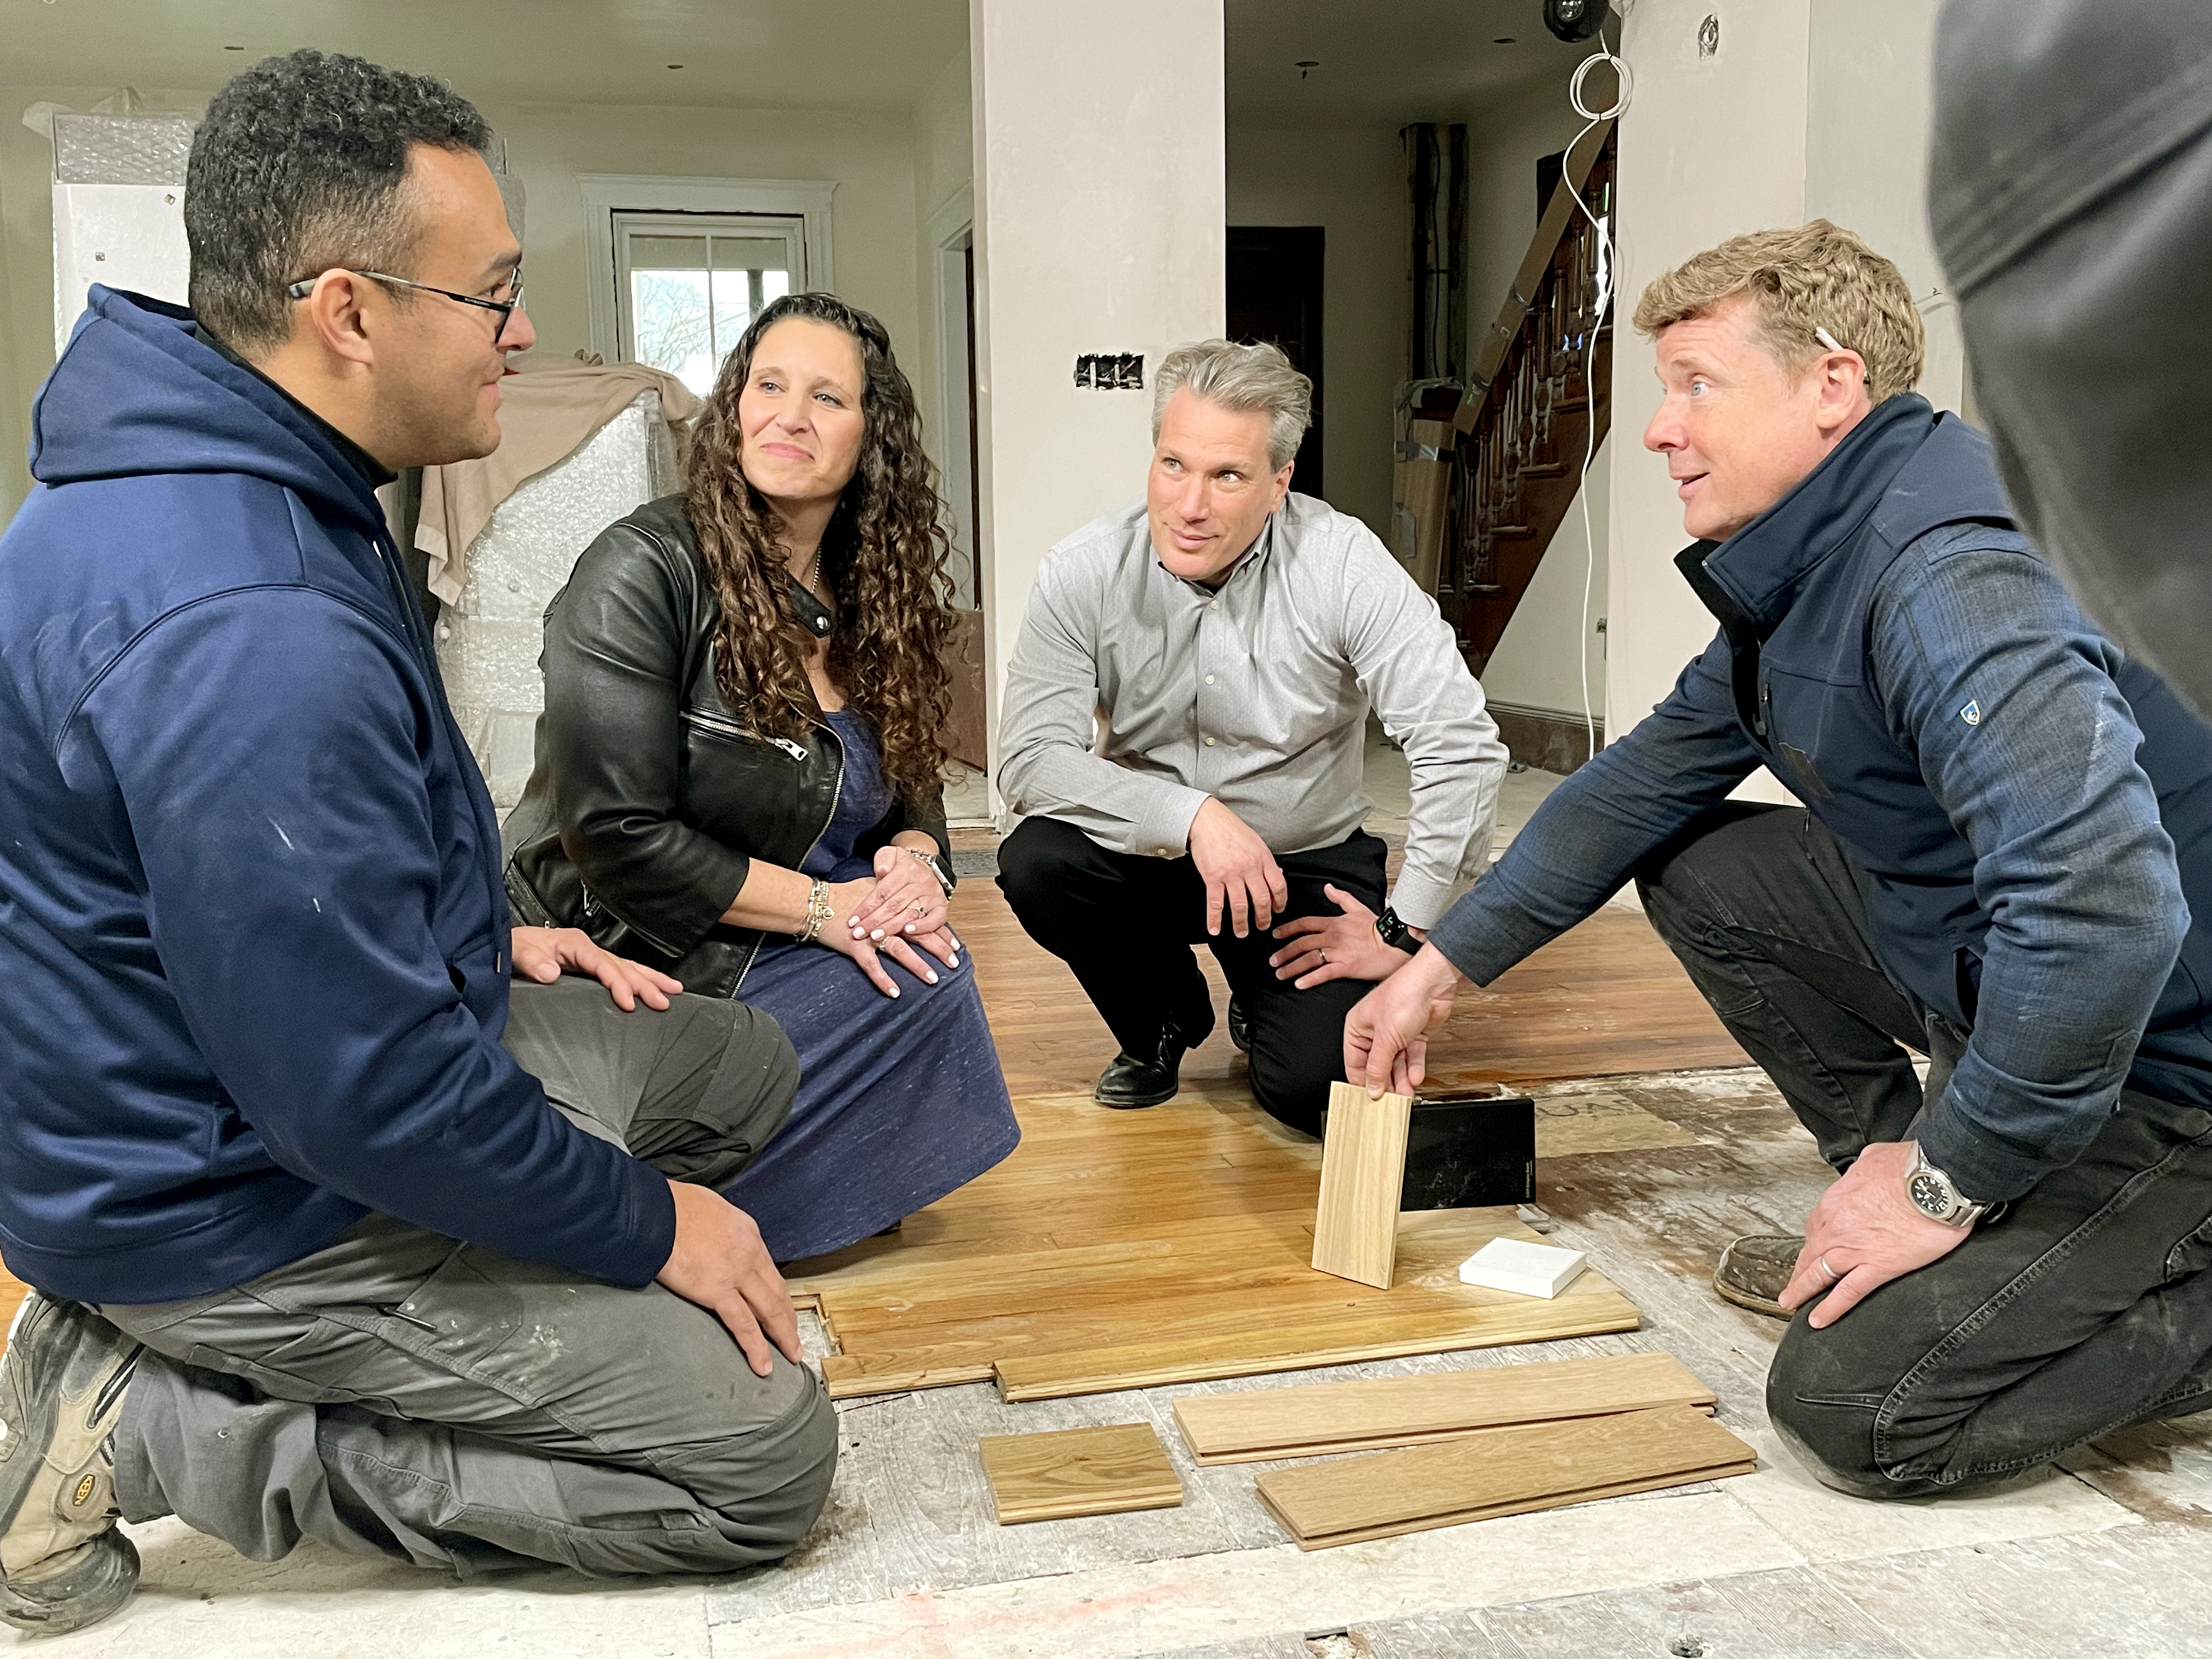 S43 E21, Kevin O’Connor discusses flooring with the homeowners and contractor